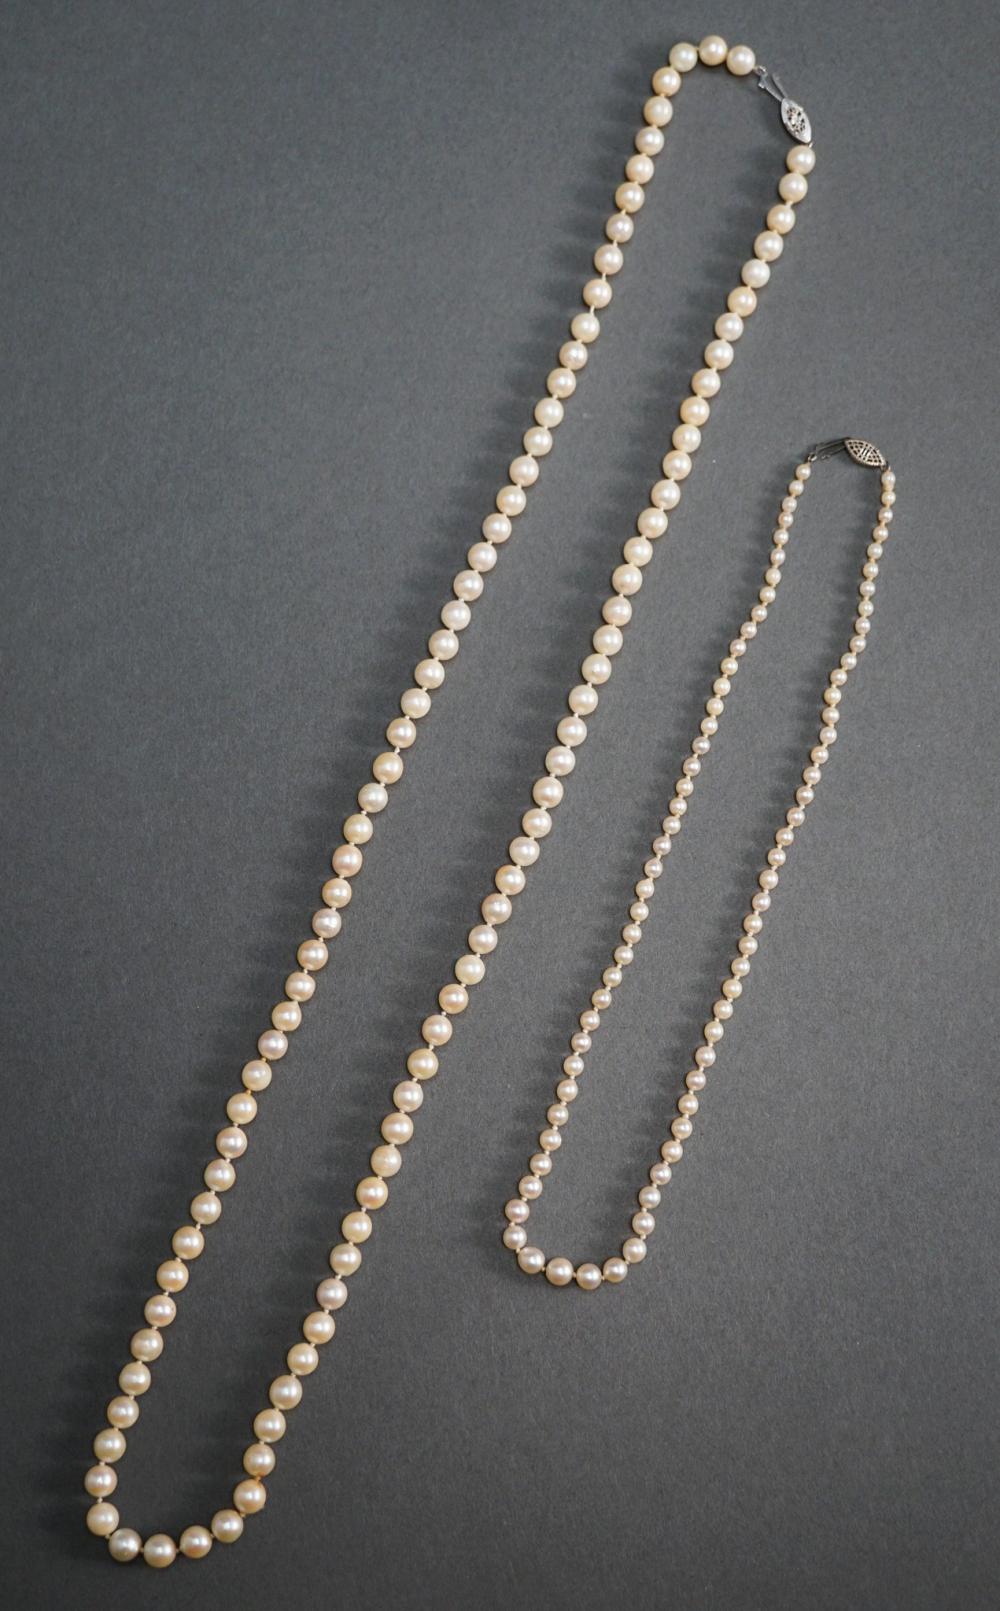 14 KARAT WHITE GOLD AND PEARL NECKLACE 32abdd